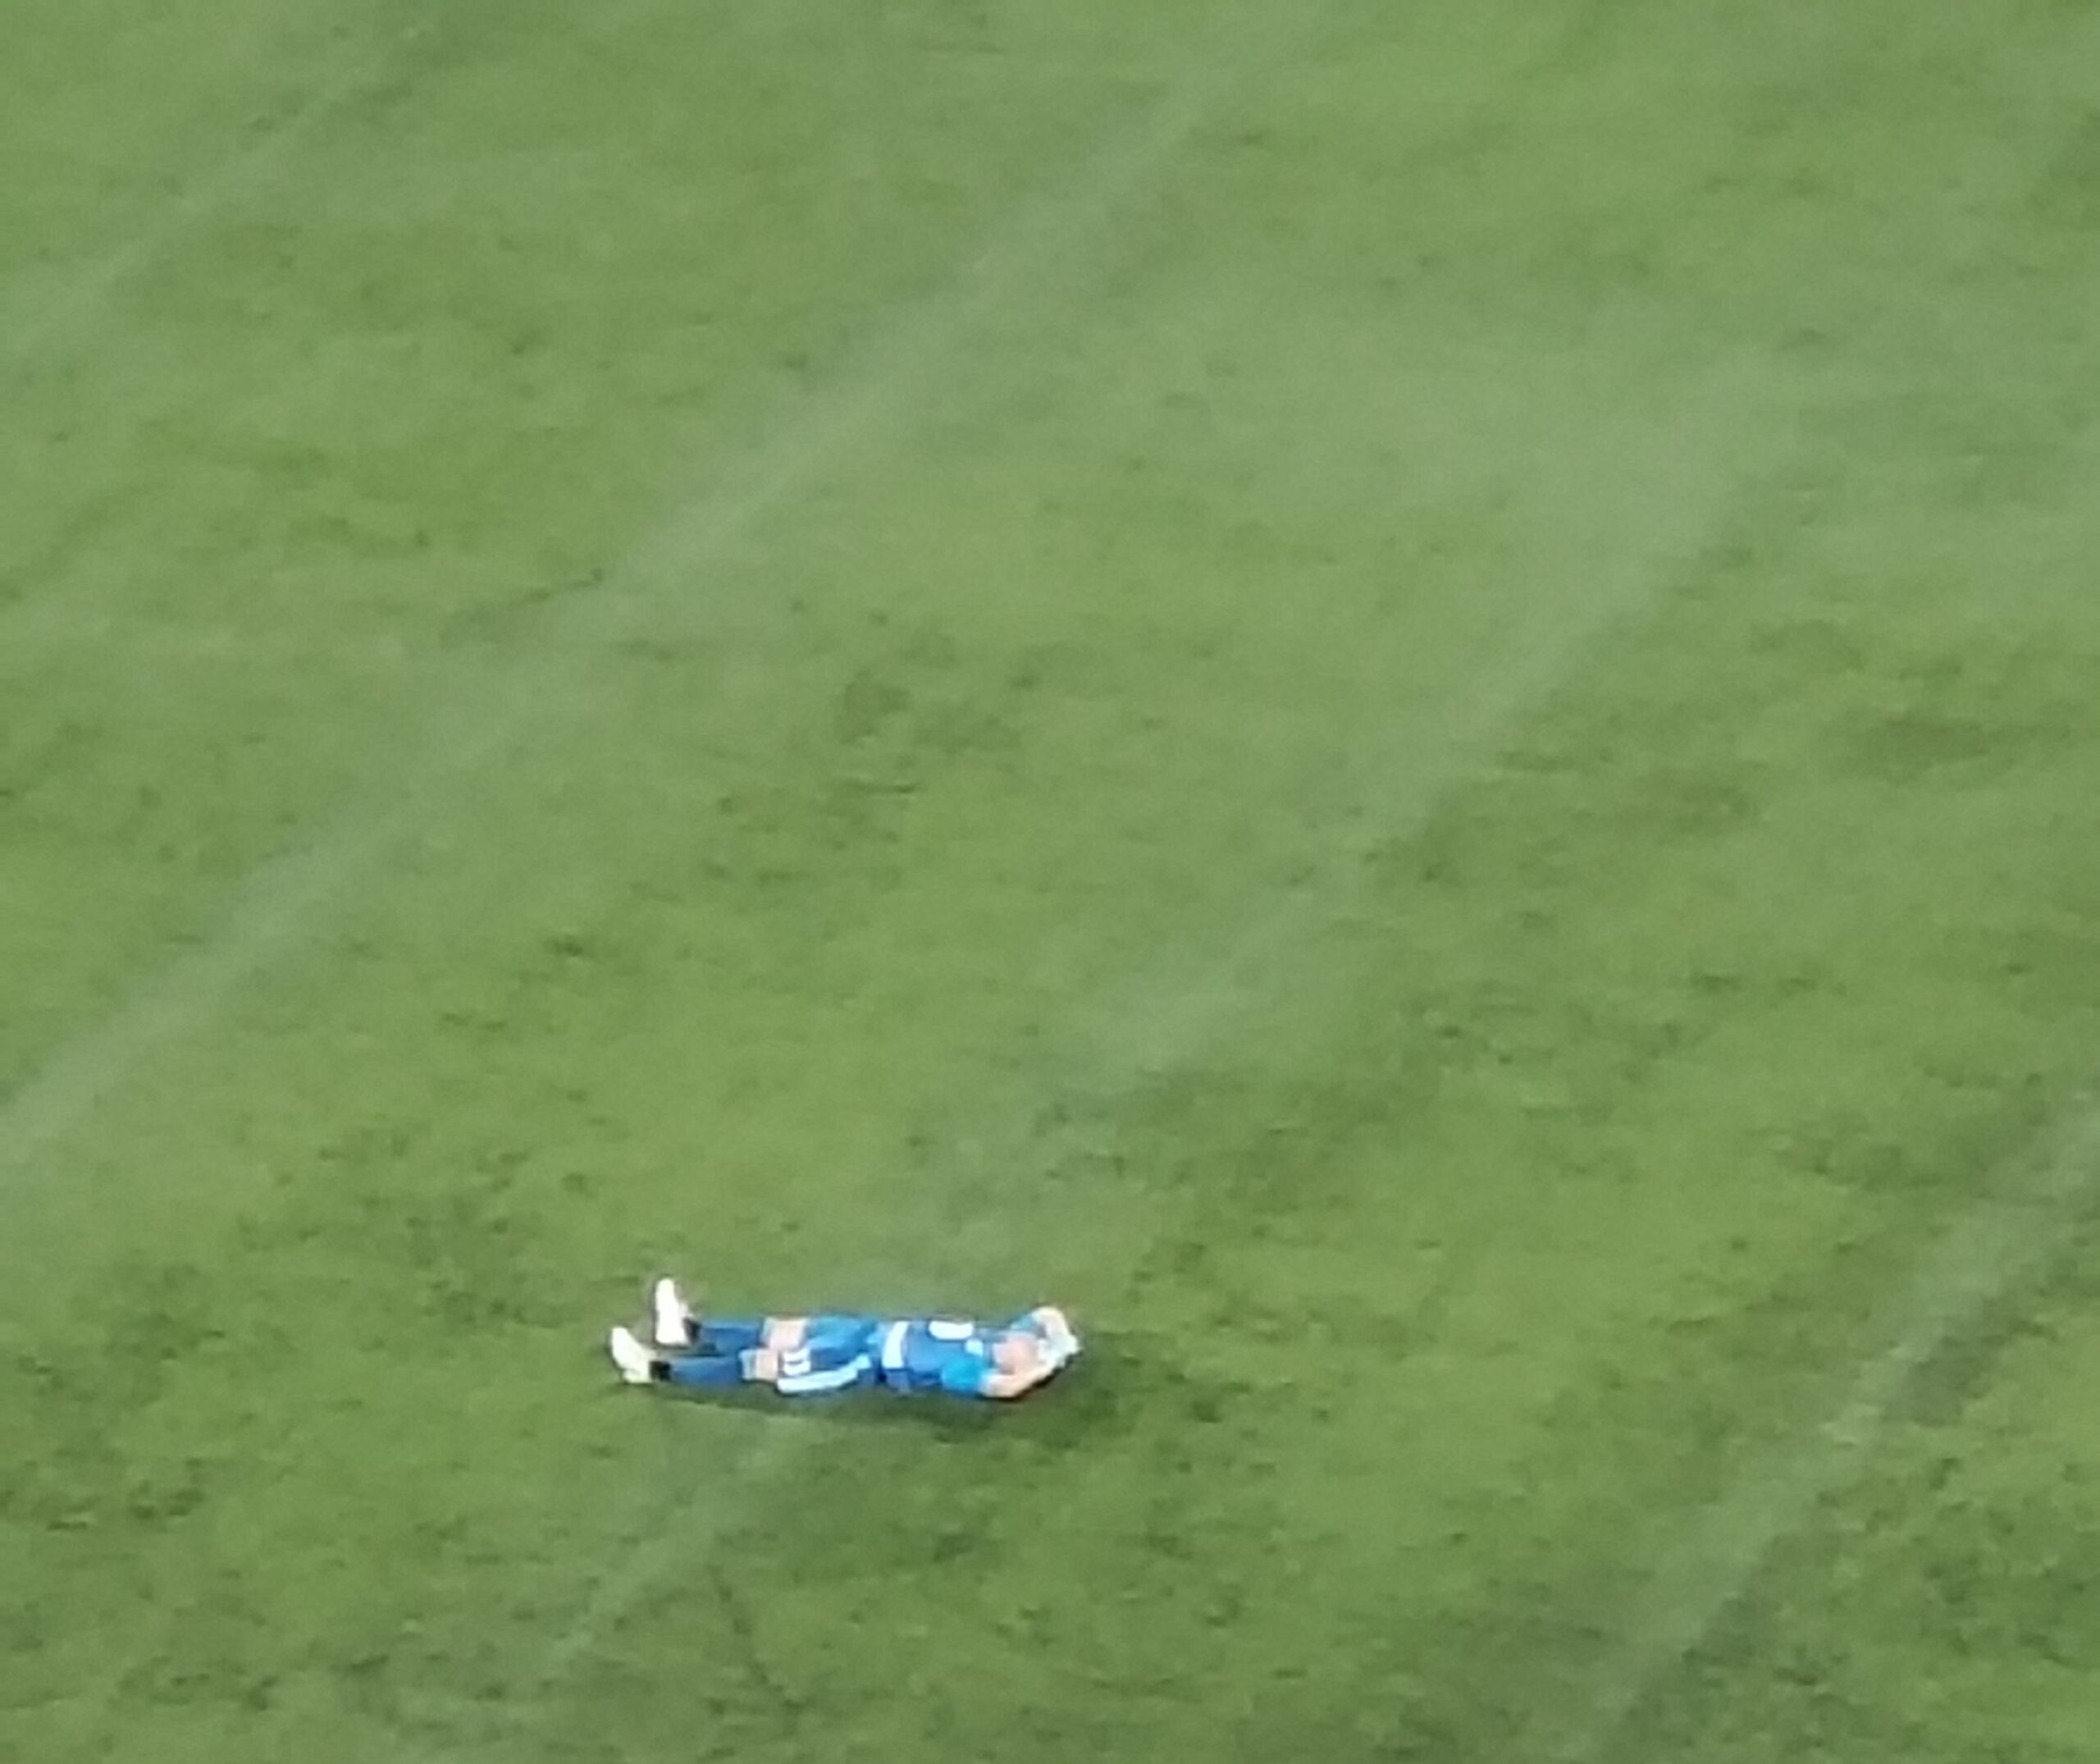 Bobby Shuttleworth, wearing the blue MNUFC keeper kit from 2018, lies on his back on the turf at TCF Bank Stadium, staring at the sky